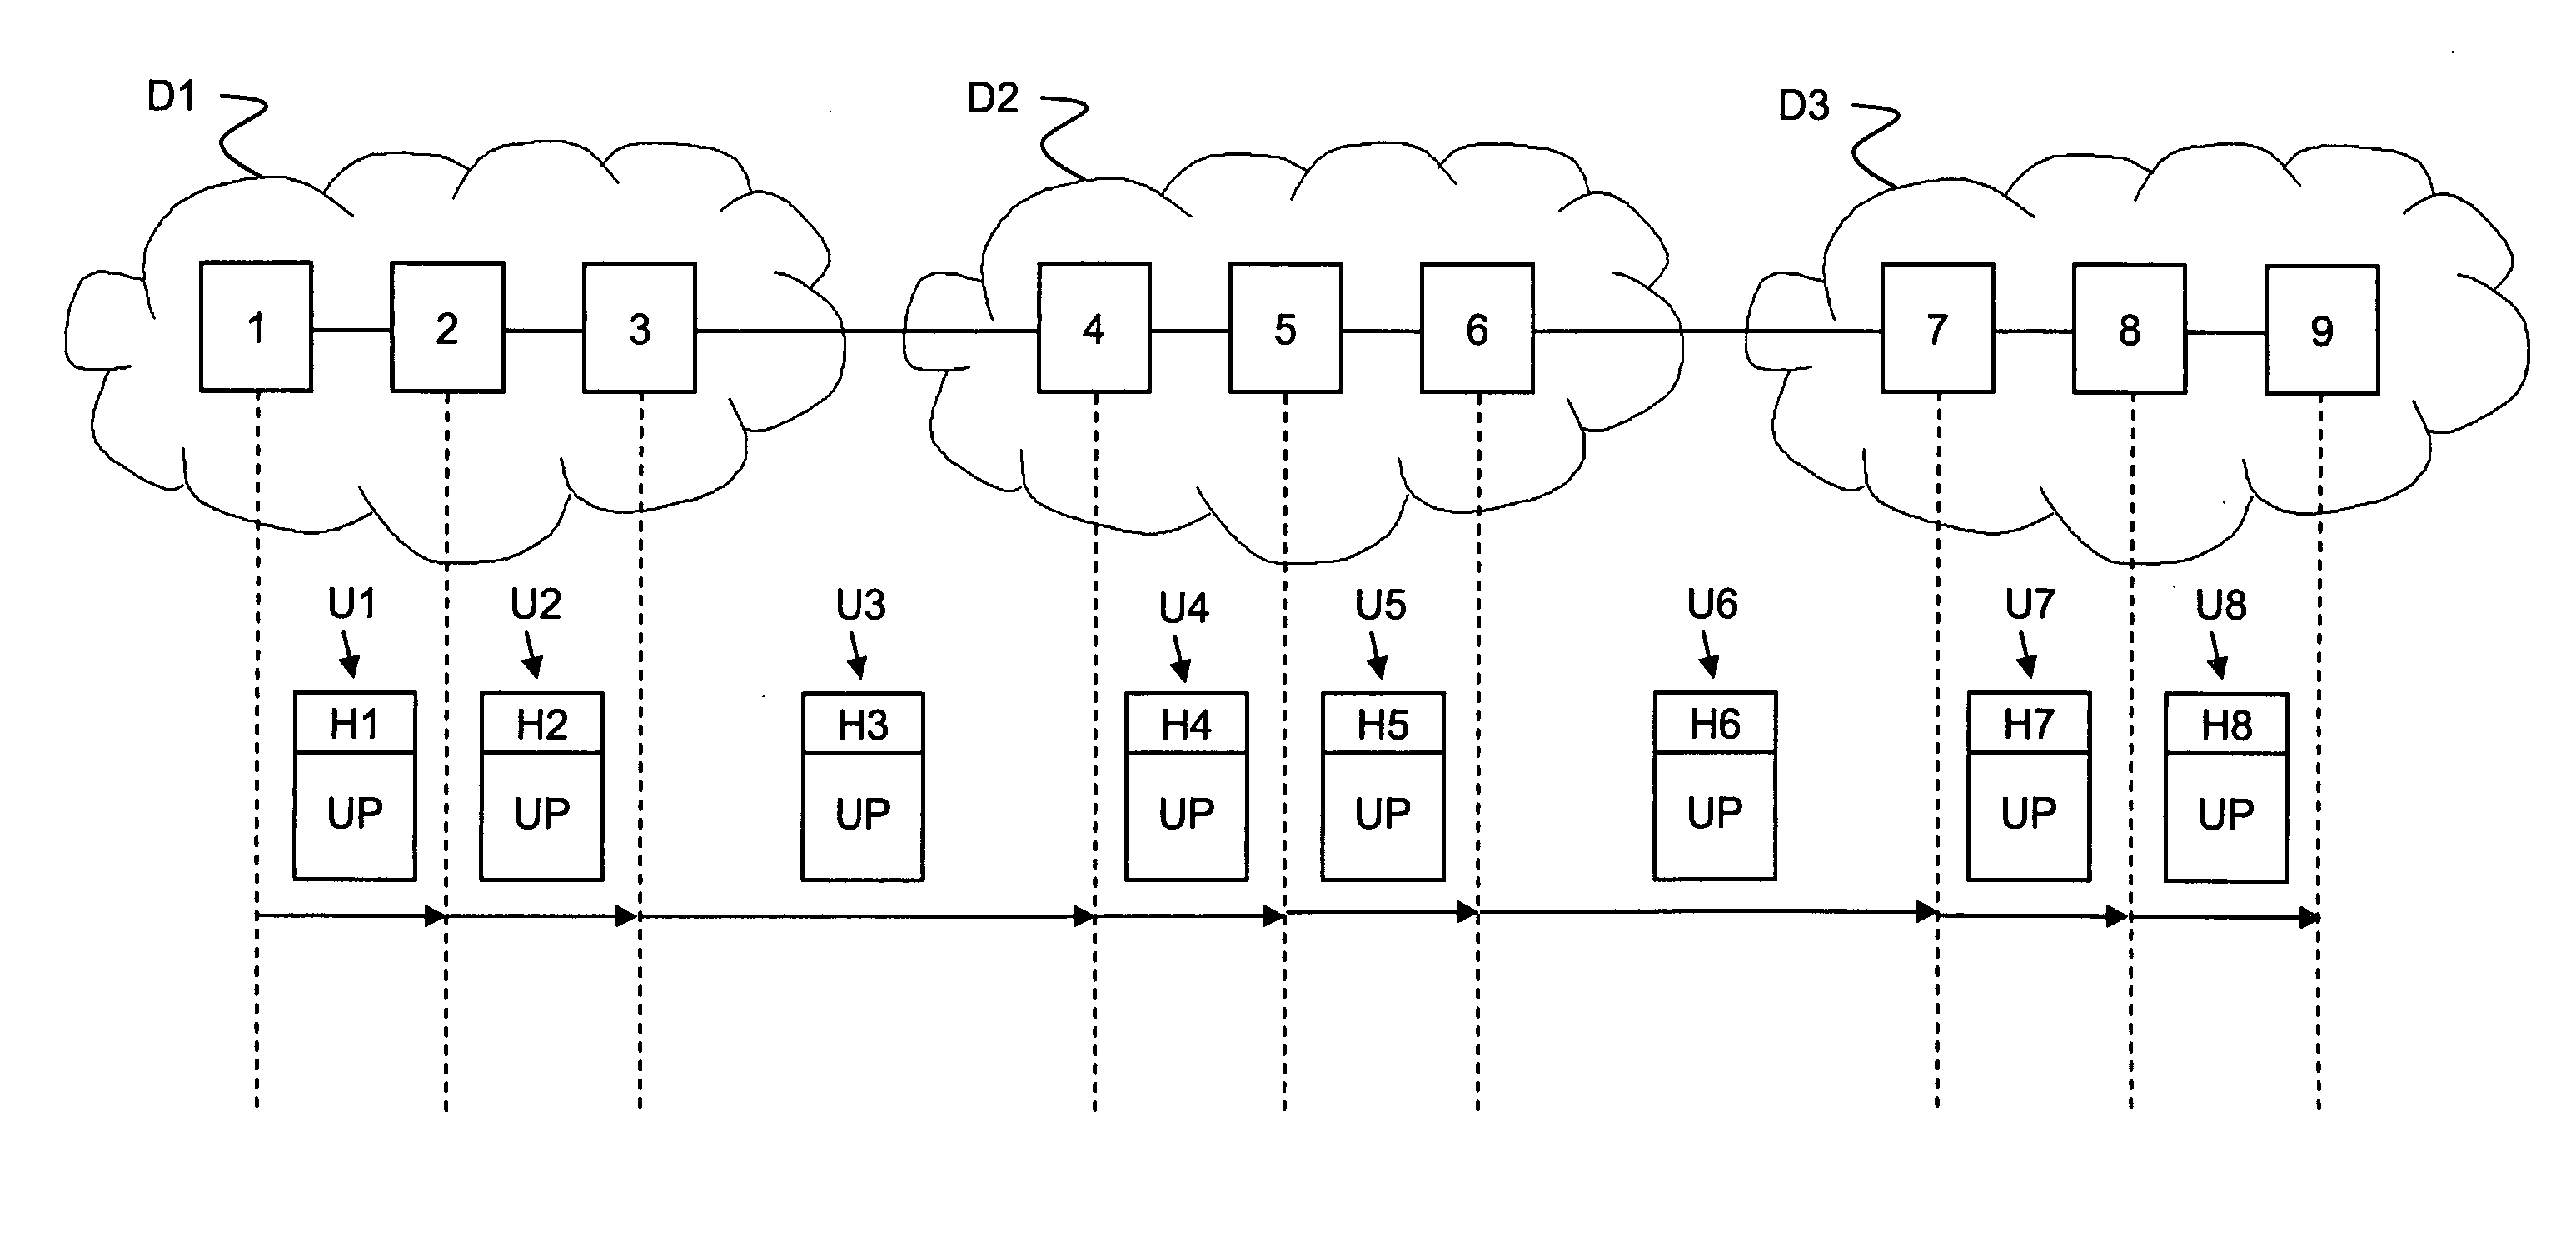 Method of monitoring a tandem connection in a MPLS telecommunication network